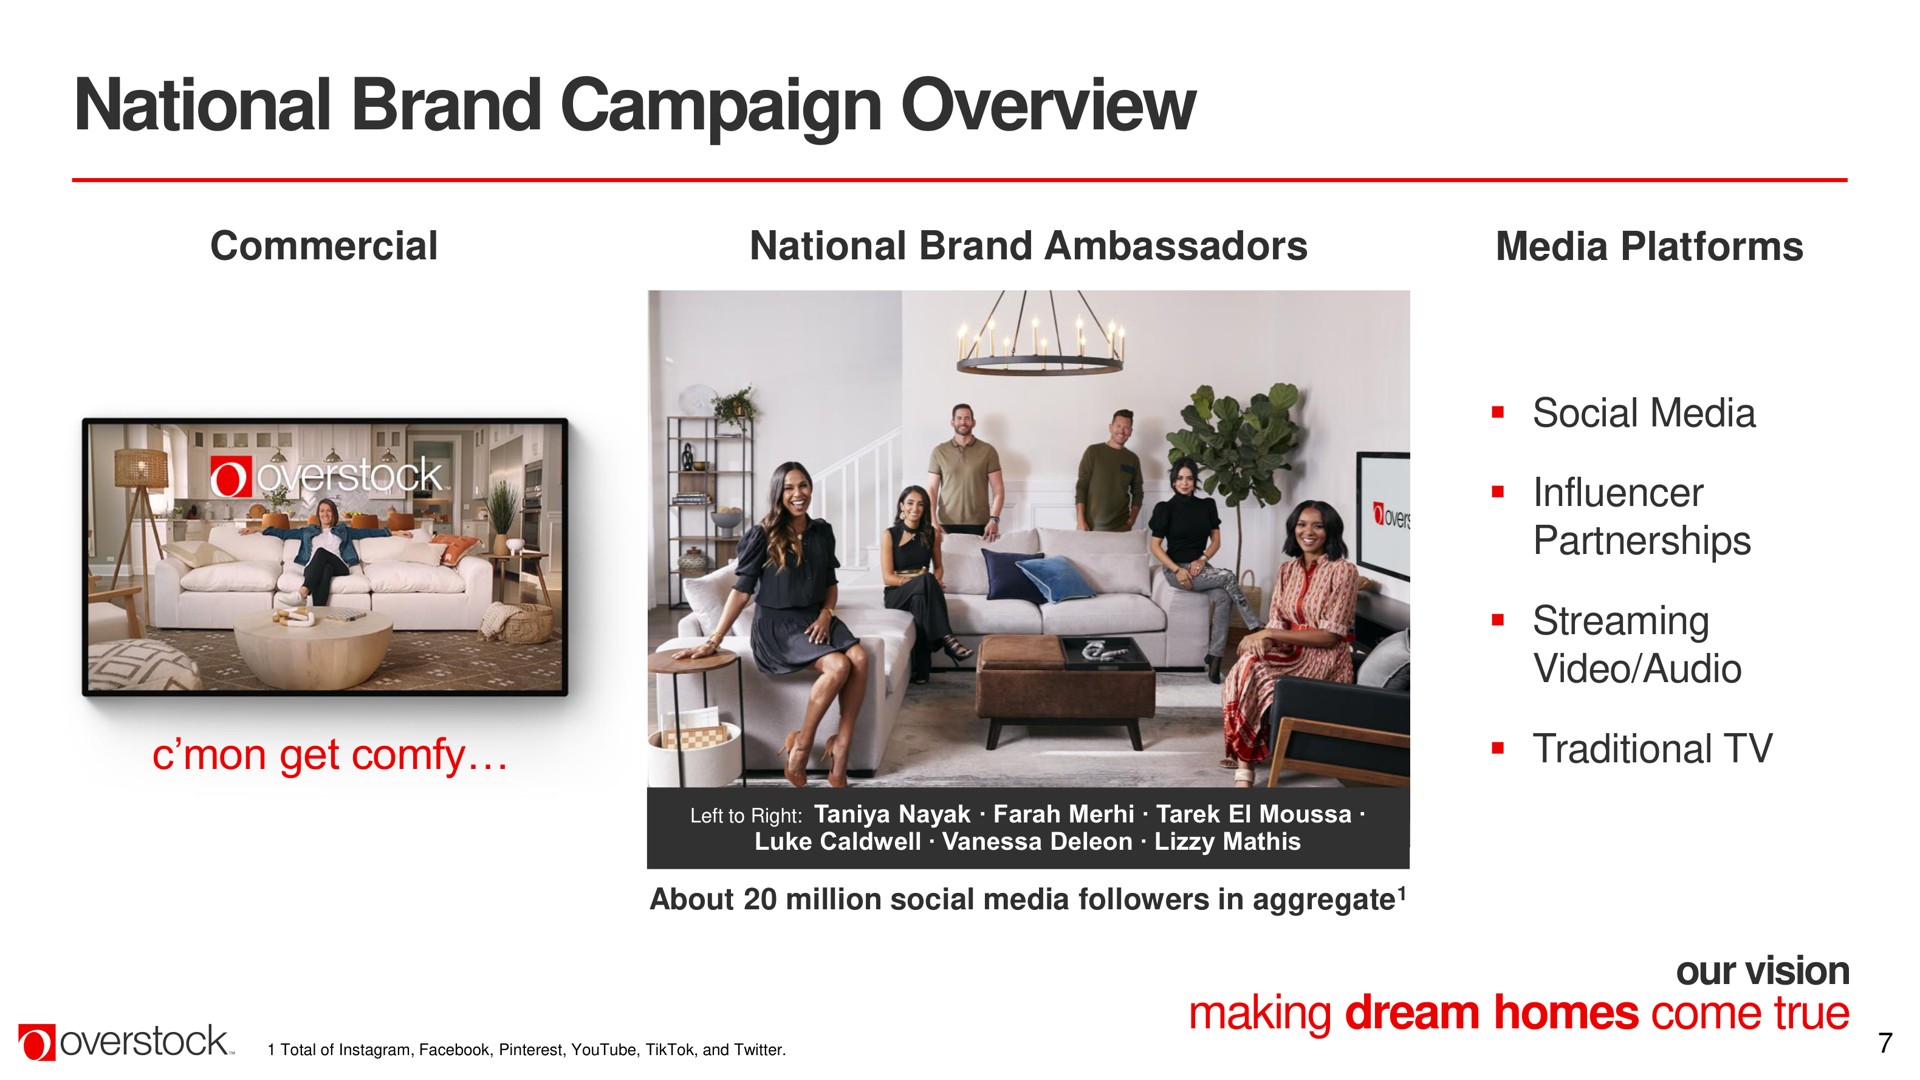 national brand campaign overview | Overstock